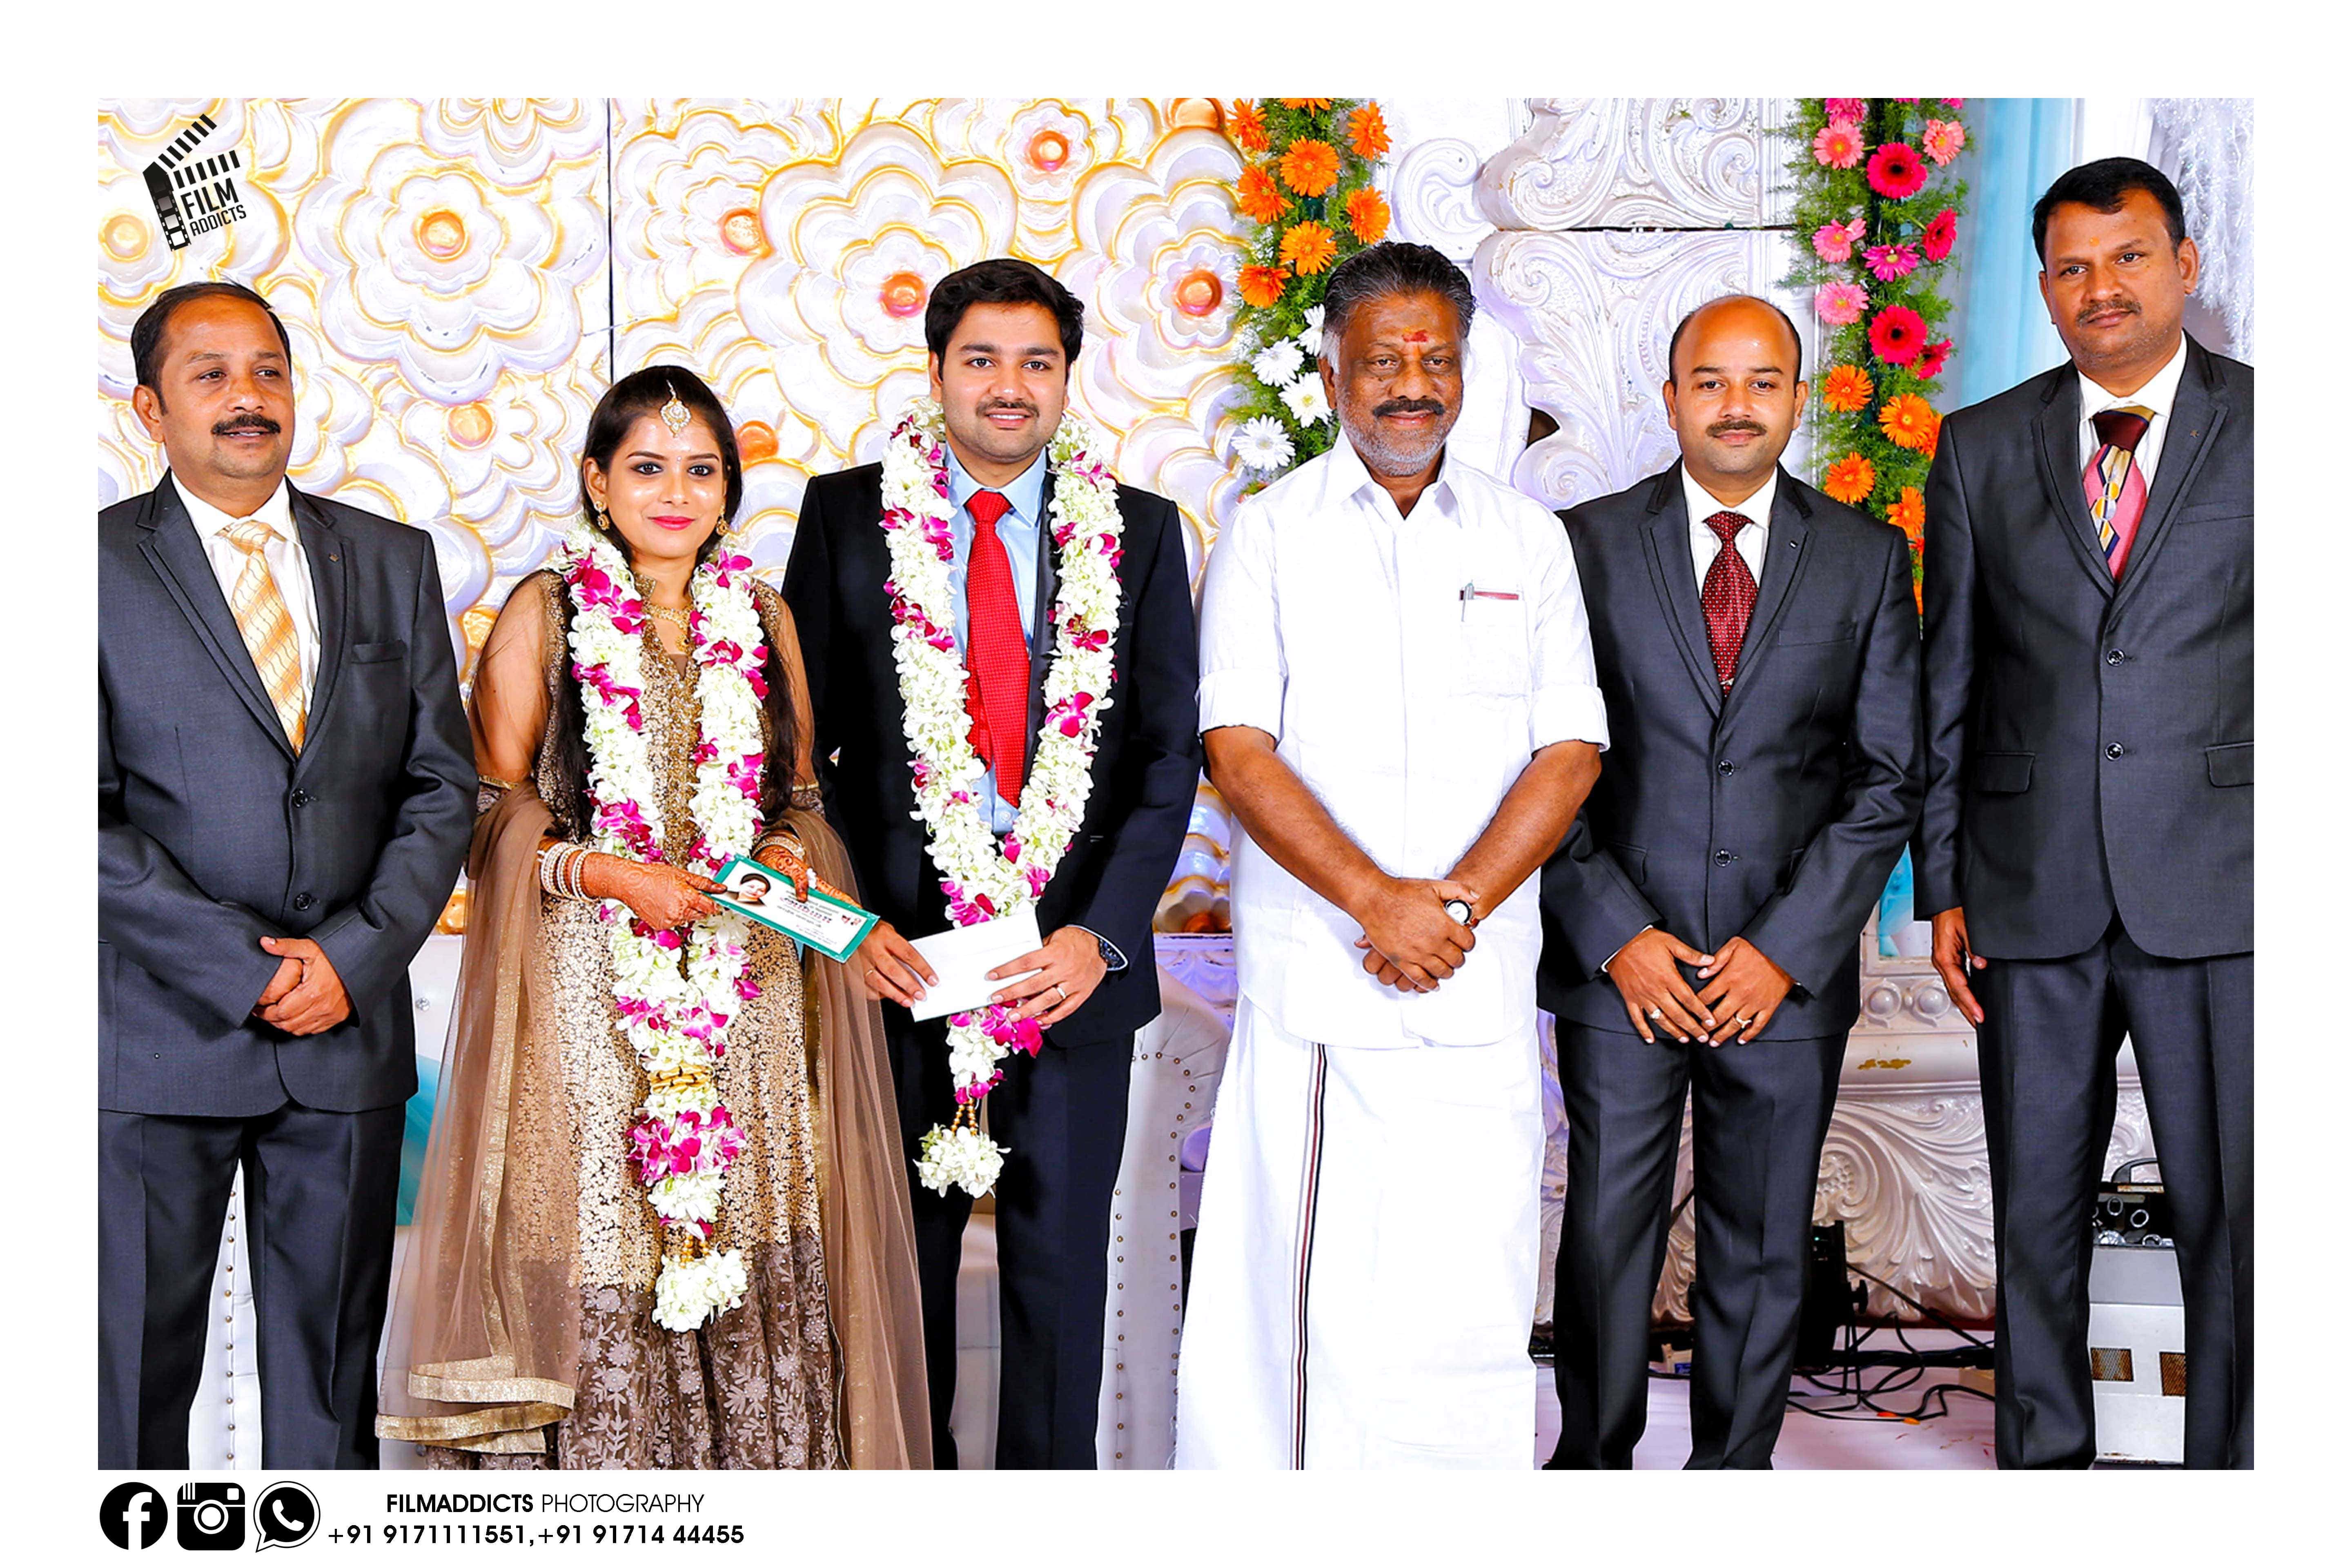 Best Betrothal Photography in Trichy,Best wedding photography in Trichy,Best candid photographers in Trichy,Best candid photography in Trichy,Best marriage photographers in Trichy,Best marriage photography in Trichy,Best photographers in Trichy,Best photography in Trichy,Best wedding candid photography in Trichy,Best wedding candid photographers in Trichy,Best wedding video in Trichy,Best wedding videographers in Trichy,Best wedding videography in Trichy,Best candid videographers in Trichy,Best candid videography in Trichy,Best marriage videographers in Trichy,Best marriage videography in Trichy,Best videographers in Trichy,Best videography in Trichy,Best wedding candid videography in Trichy,Best wedding candid videographers in Trichy,Best Betrothal Photography in Trichy,Best drone operators in Trichy,Best wedding studio in Trichy,Best Betrothal Photography in Trichy,Best professional photography in Trichy,No.1 wedding photographers in Trichy,No.1 wedding photography in Trichy,Trichy wedding photographers,Trichy wedding photography,Trichy wedding videos,Best candid videos in Trichy,Best candid photos in Trichy,Best helicam operators photography in Trichy,Best helicam operator photographers in Trichy,Best outdoor videography in Trichy,Best professional wedding photography in Trichy,Best outdoor photography in Trichy,Best outdoor photographers in Trichy,Best drone operators photographers in Trichy,Best wedding candid videography in Trichy,tamilnadu wedding photography, tamilnadu.